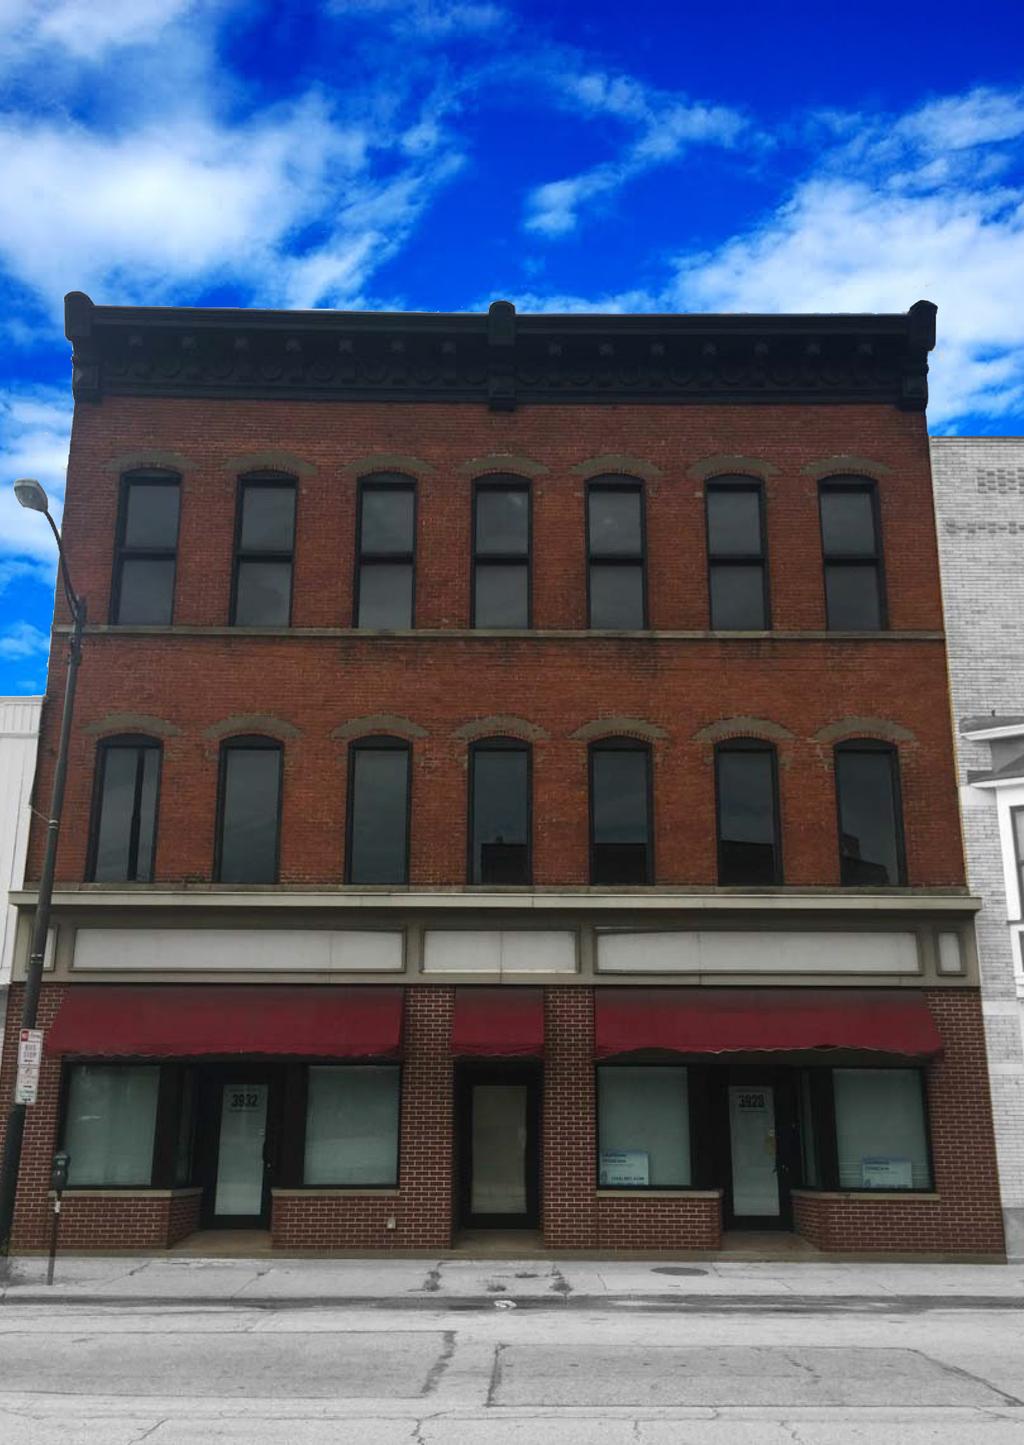 3928 Lorain Avenue Cleveland, Ohio 44113 9,441 SF building plus 3,882 SF basement Mixed Use building for Sale or Lease In line retail space with excellent frontage and visibility on Lorain Avenue 2nd